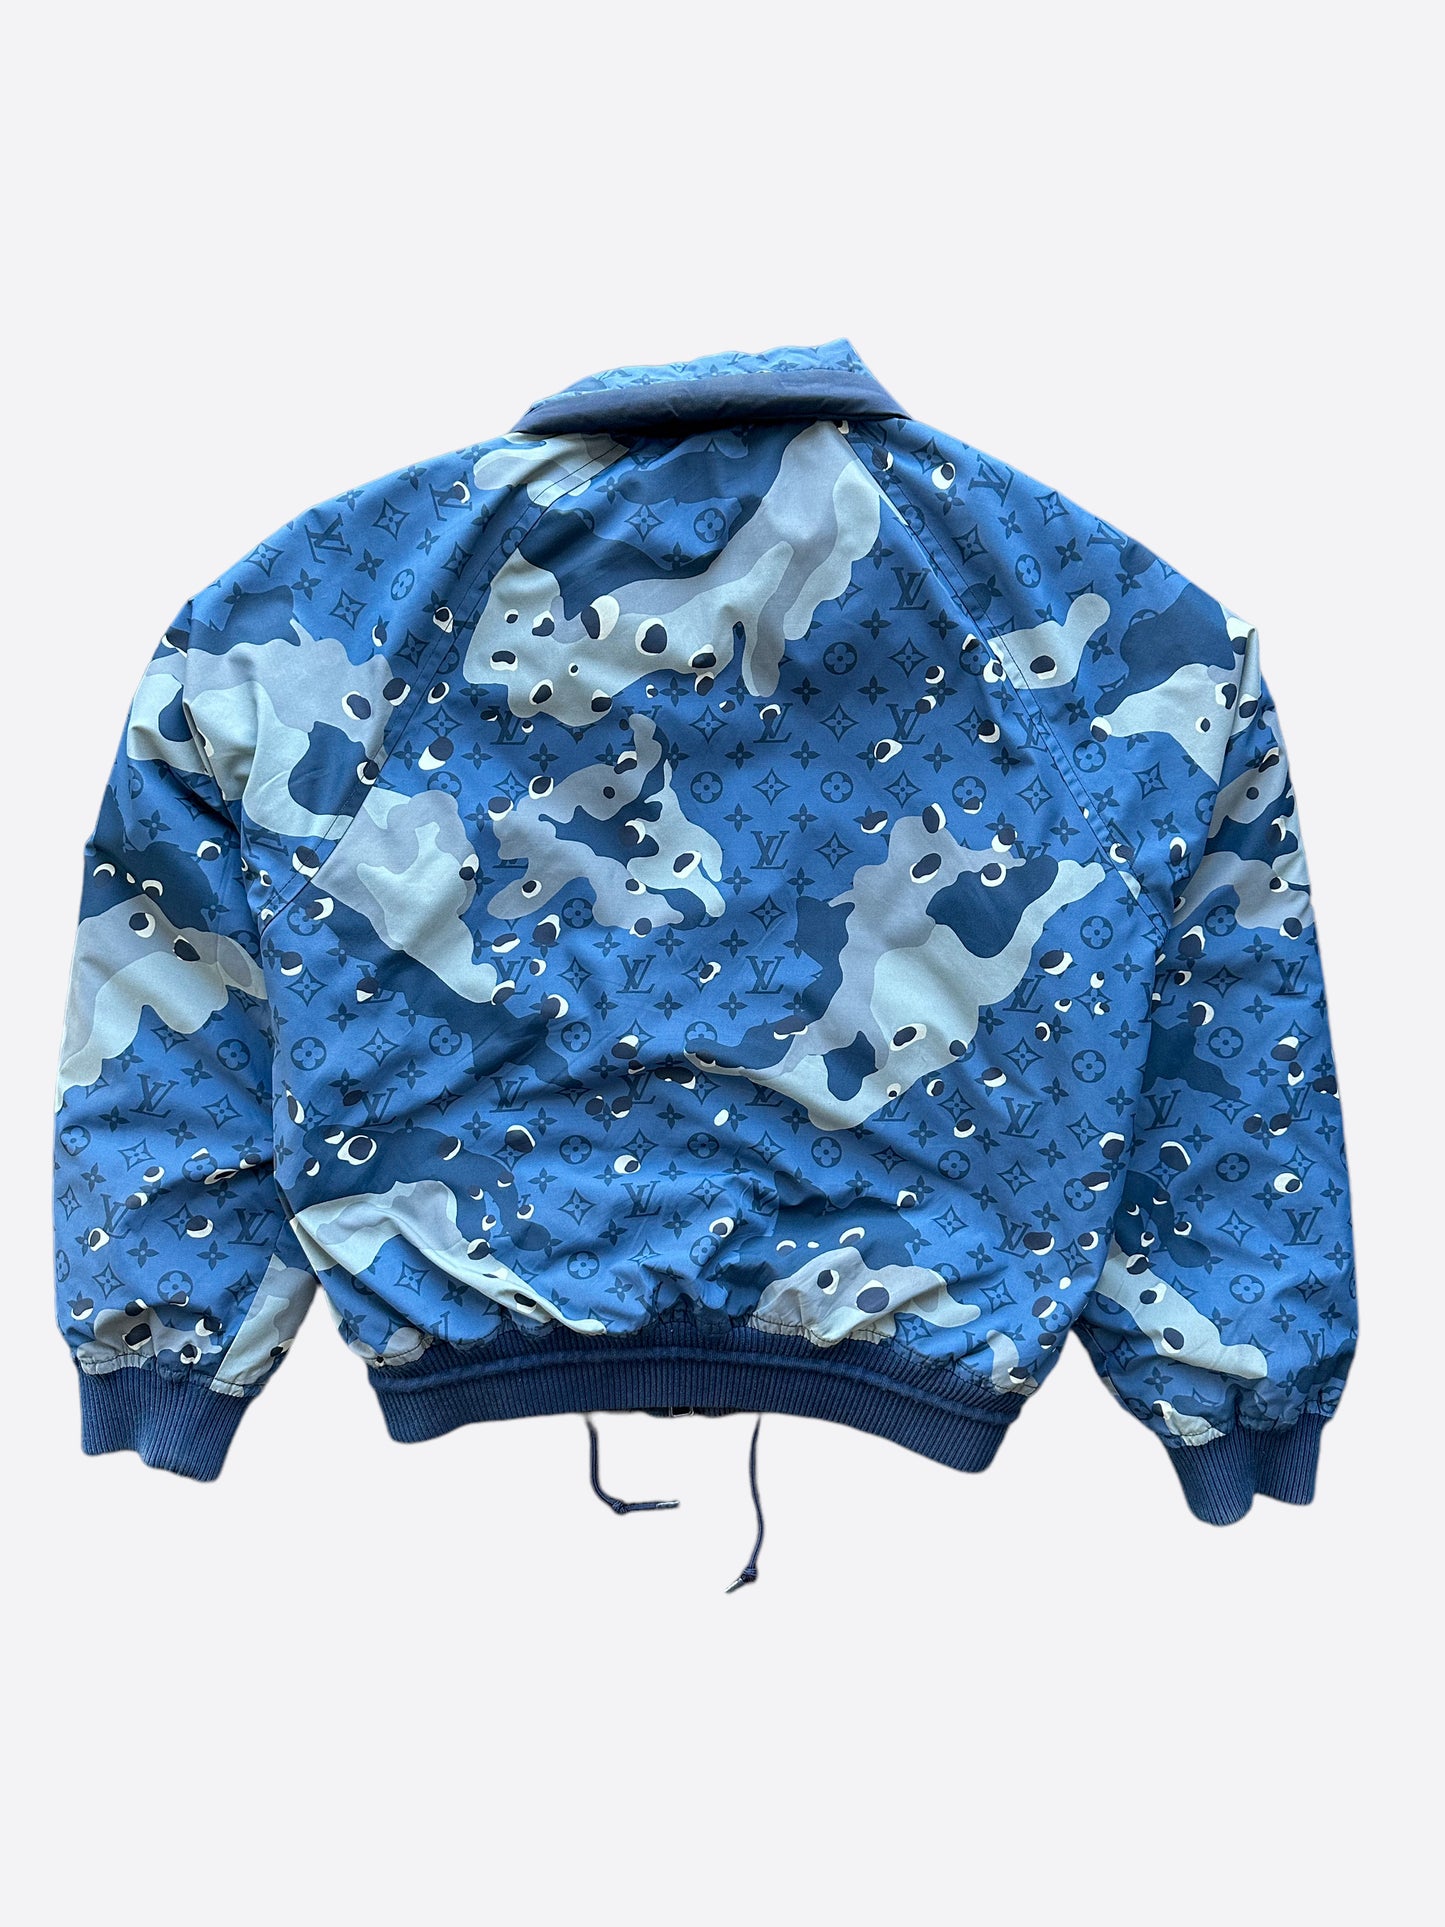 Louis Vuitton 2020 Reversible Camo Padded Jacket w/ Tags - Blue Outerwear,  Clothing - LOU487515